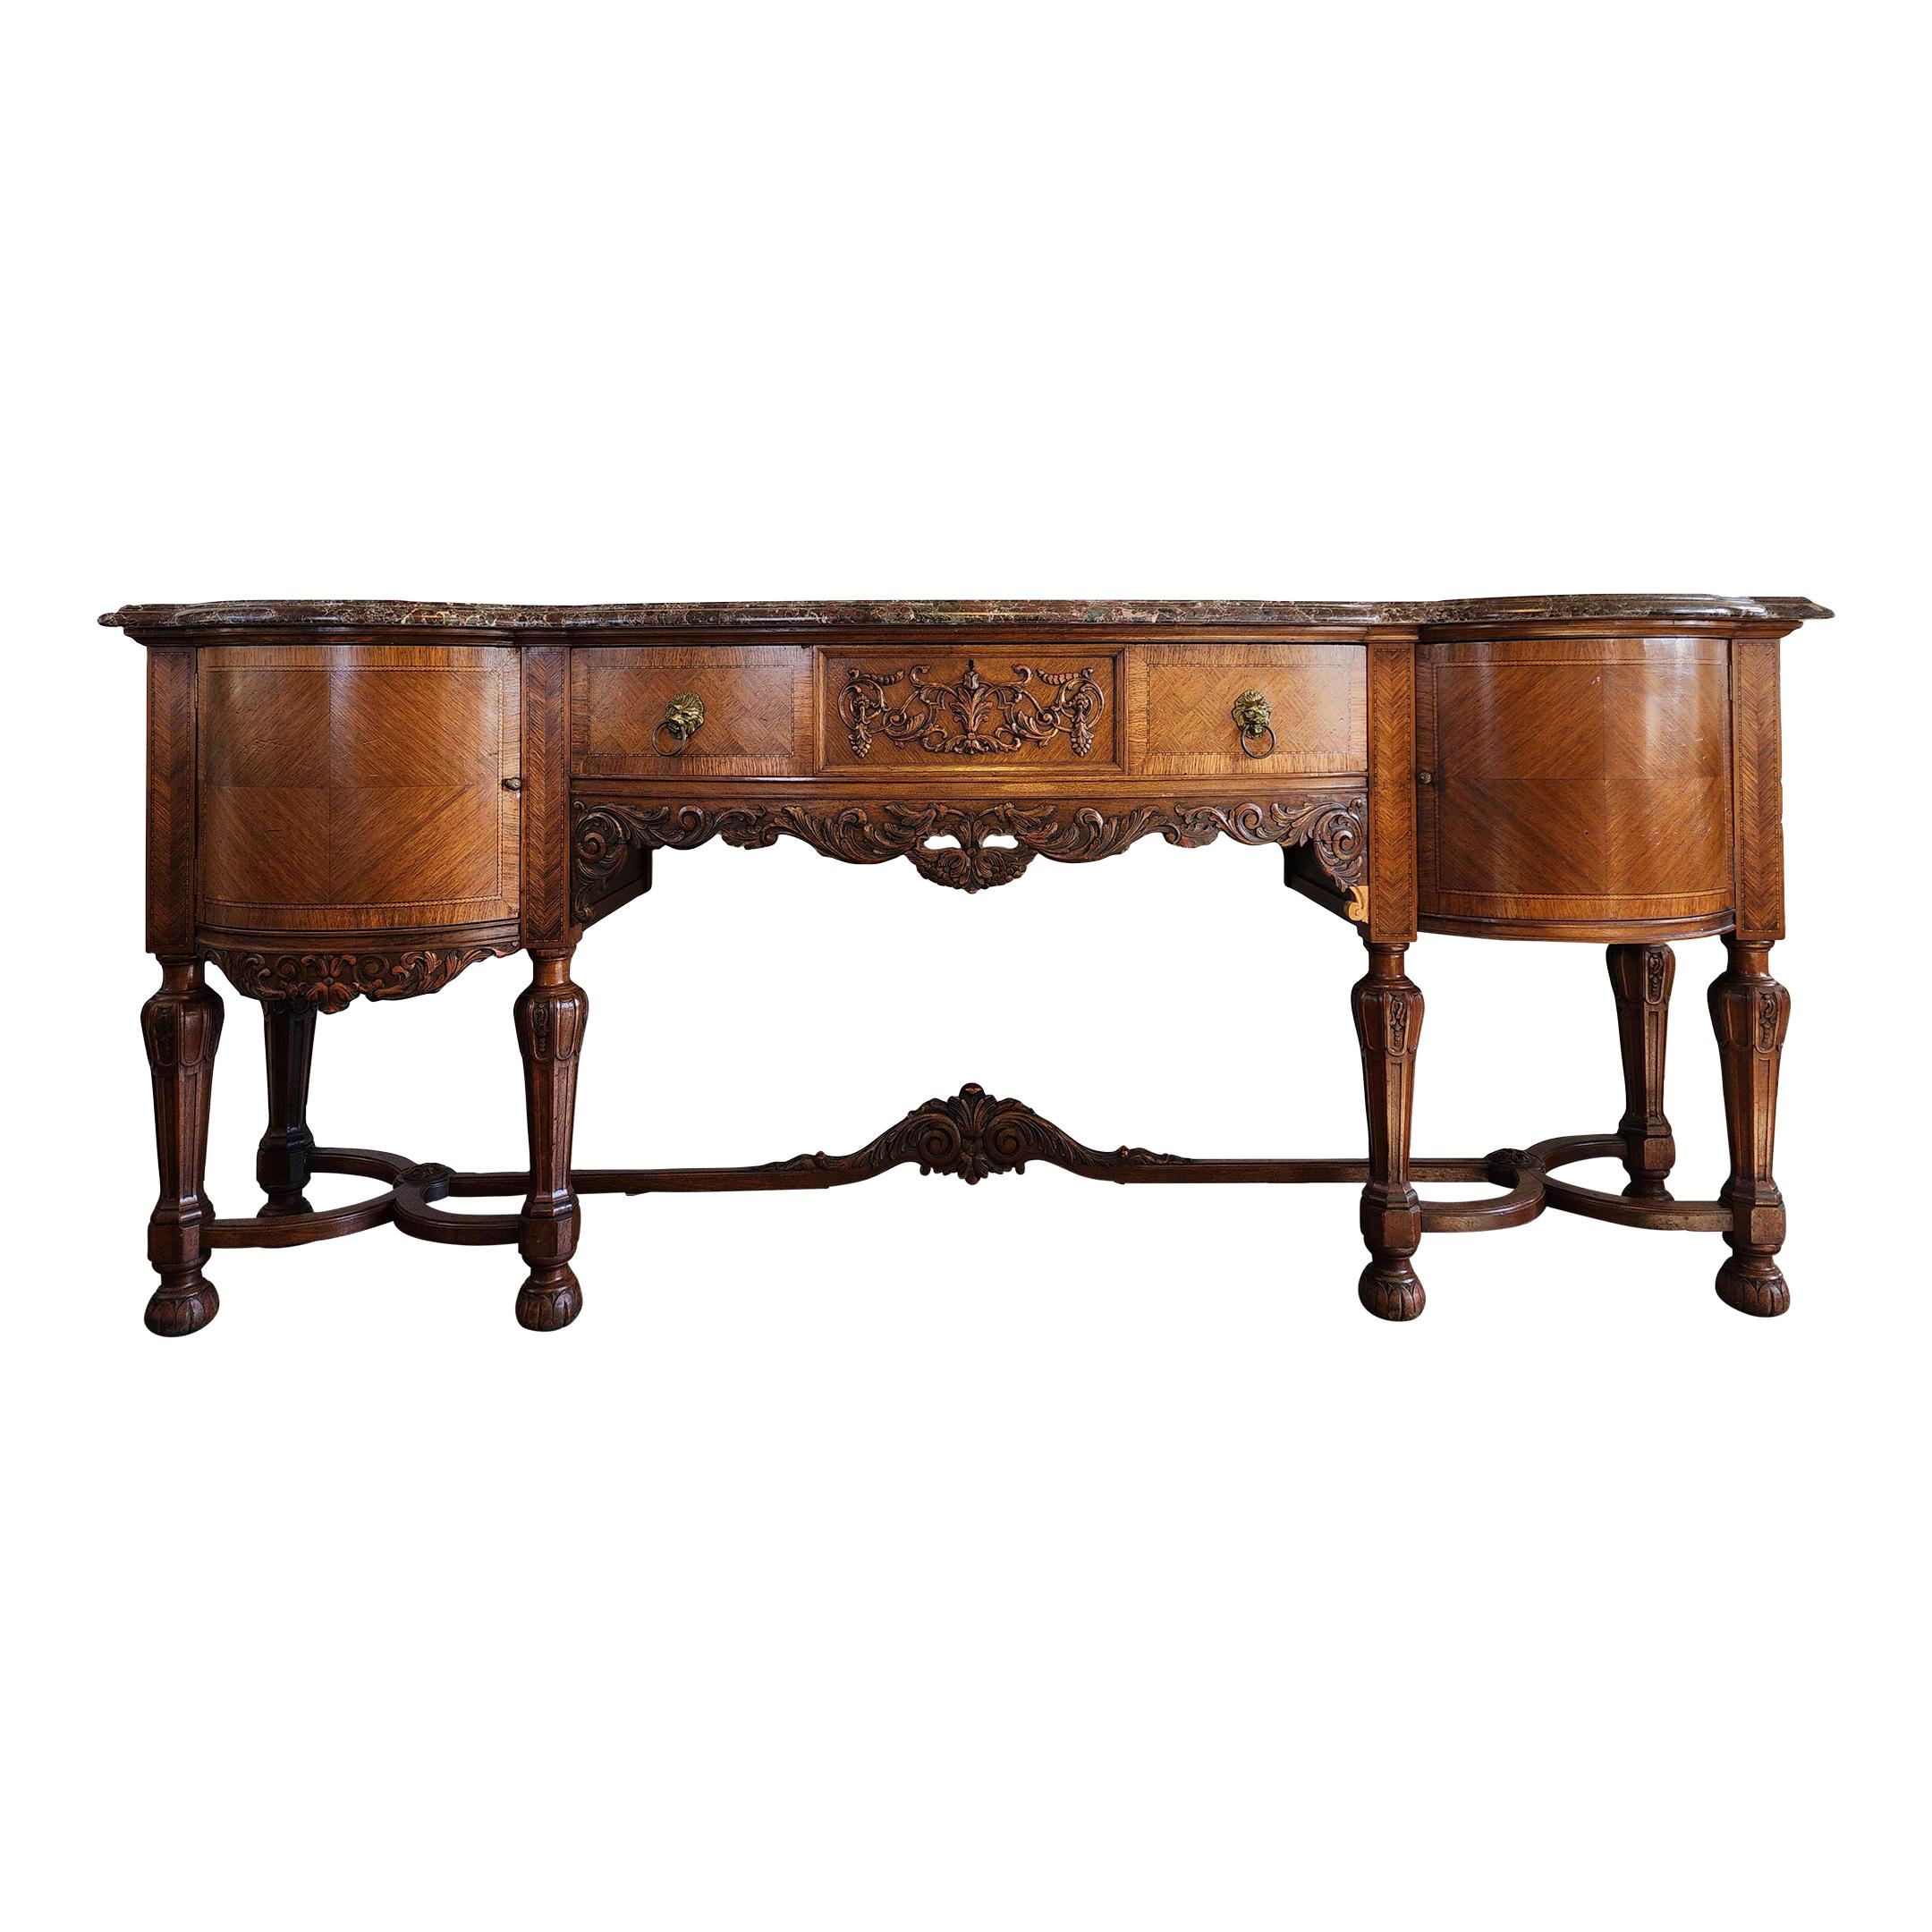 Early 20th Century Antique Carved Wood Louis XVI Neoclassical Sideboard For Sale